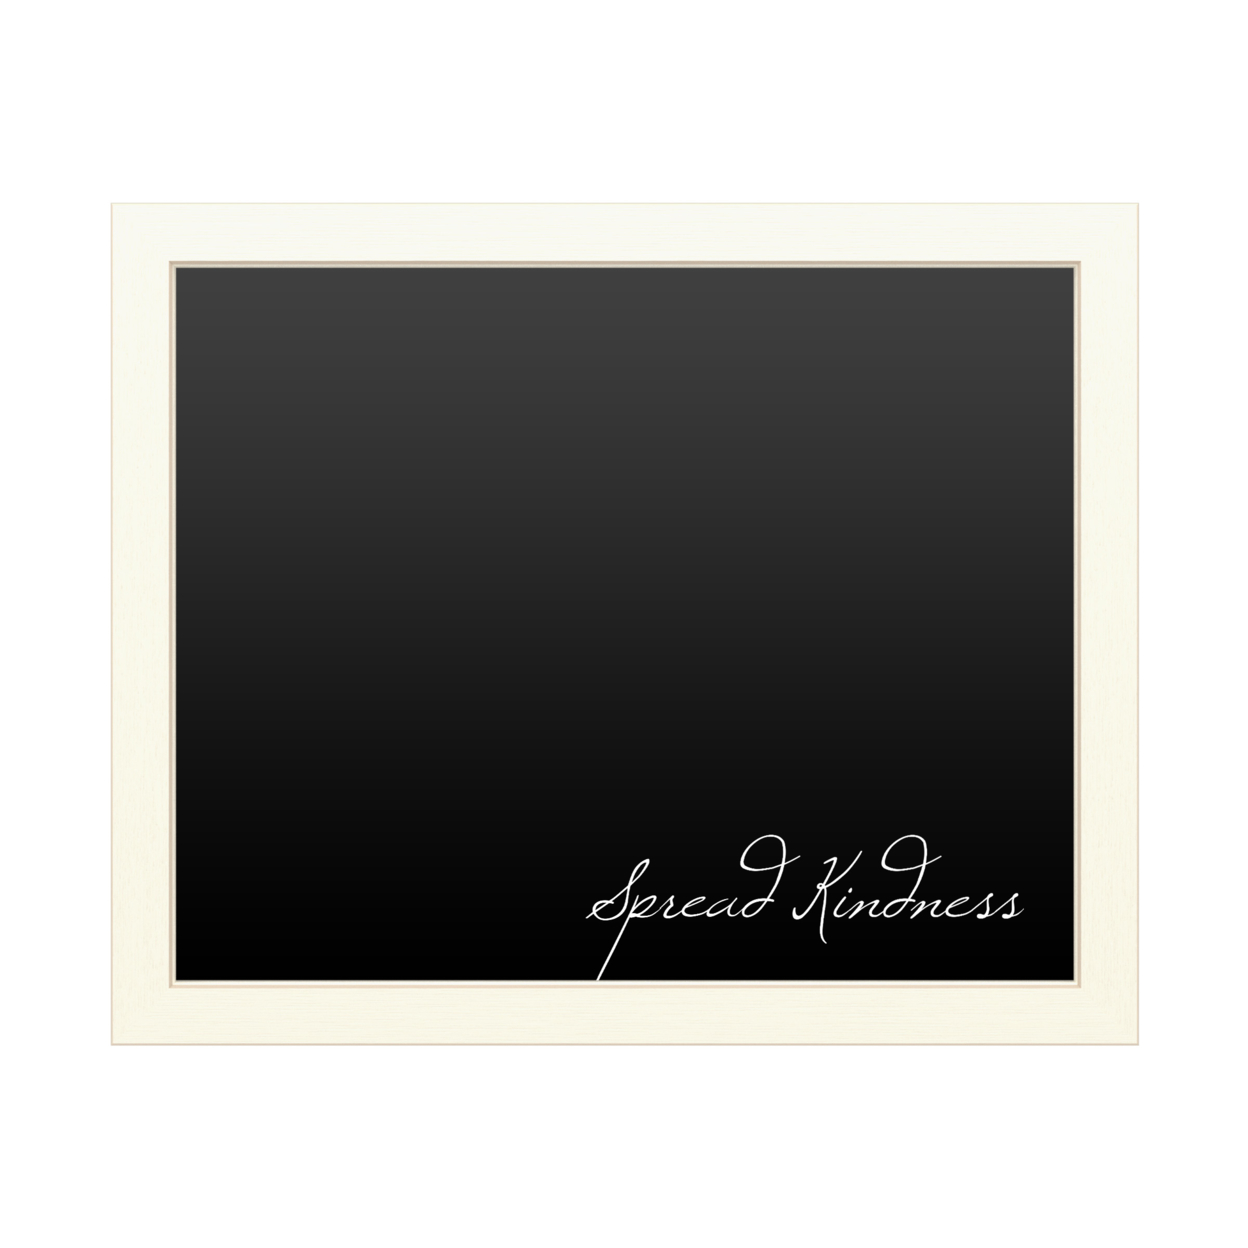 16 X 20 Chalk Board With Printed Artwork - Spread Kindness White Board - Ready To Hang Chalkboard